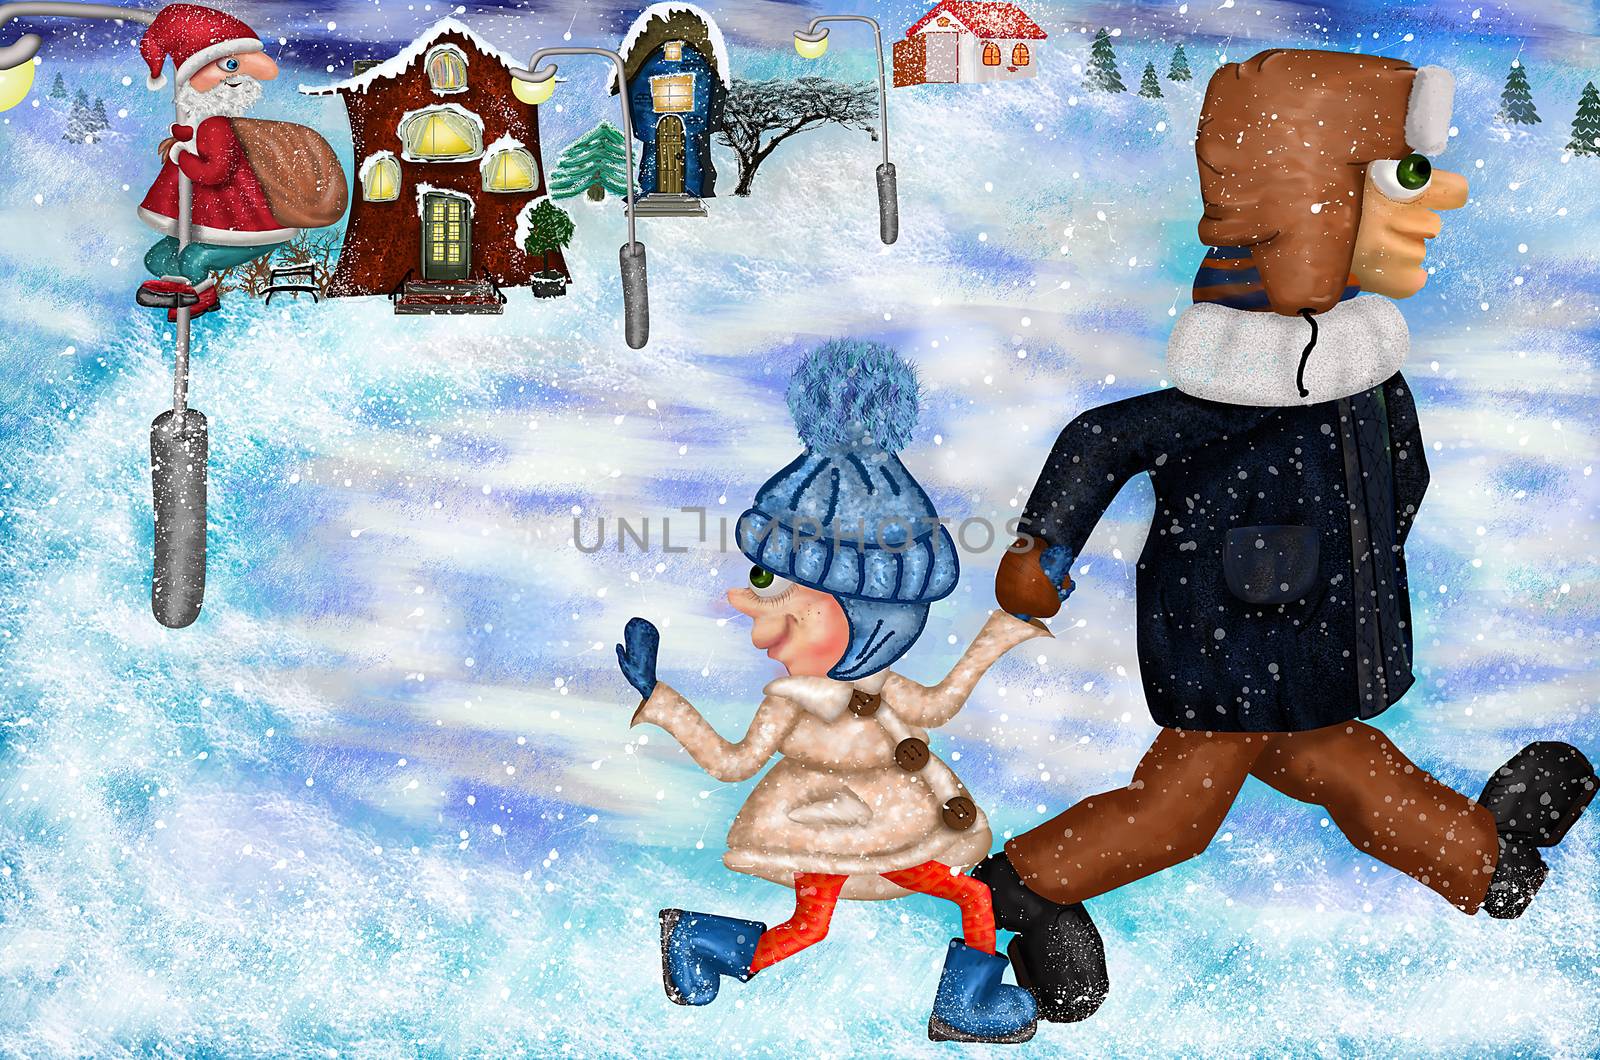 Cute friendship girl with Santa Claus. Abstract Merry Christmas and Happy New Year time cartoon illustrations greeting card with outdoor landscape, house, girl, dad and Santa Claus on winter background.